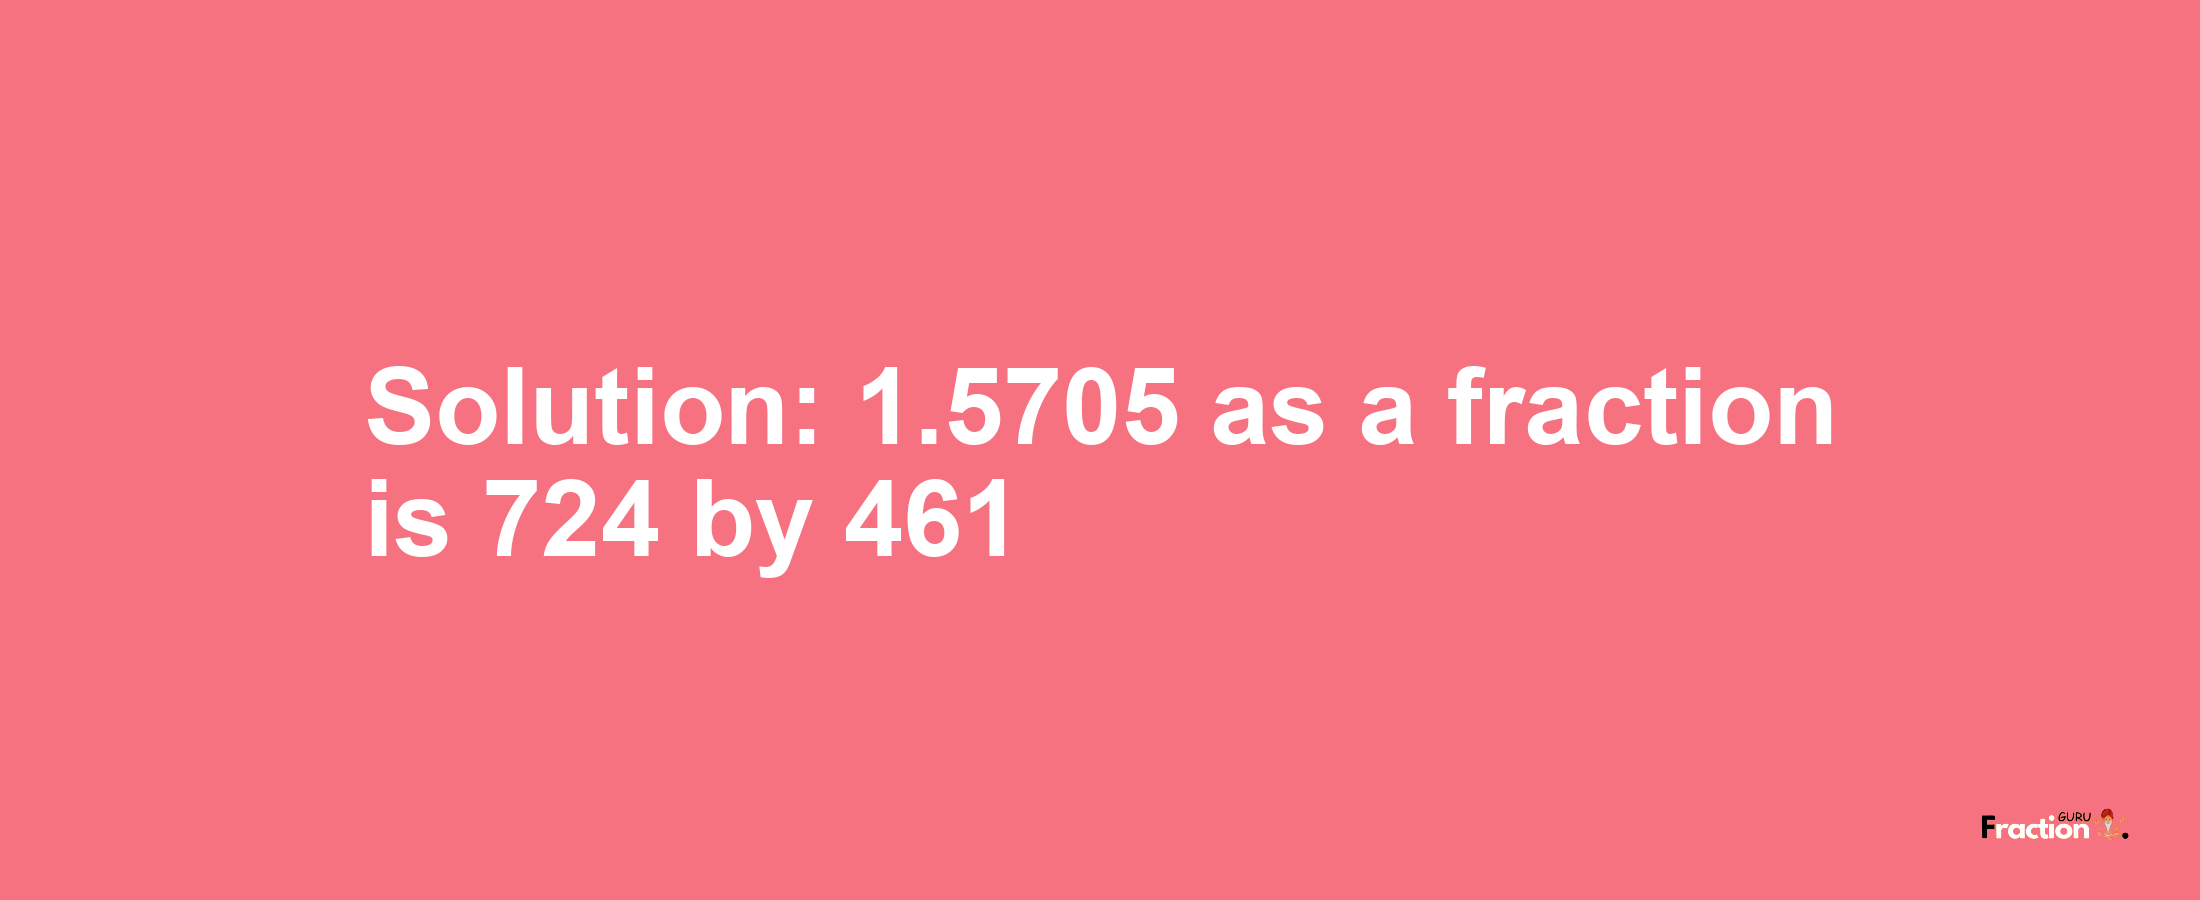 Solution:1.5705 as a fraction is 724/461